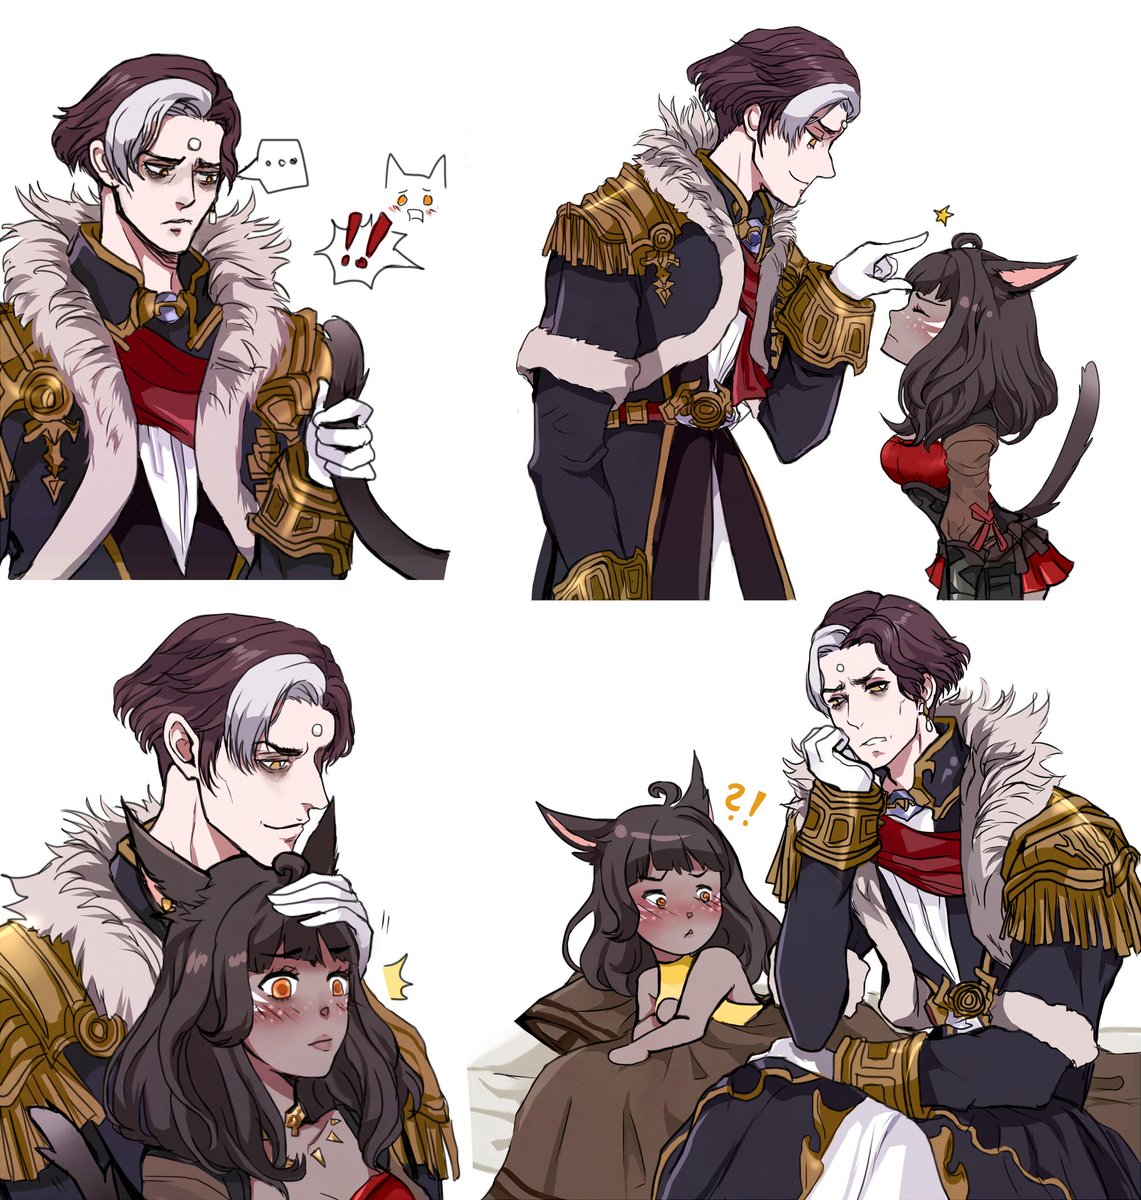 emet-selch x wol tiny ship art ( she might get a heart attack at this rate ...